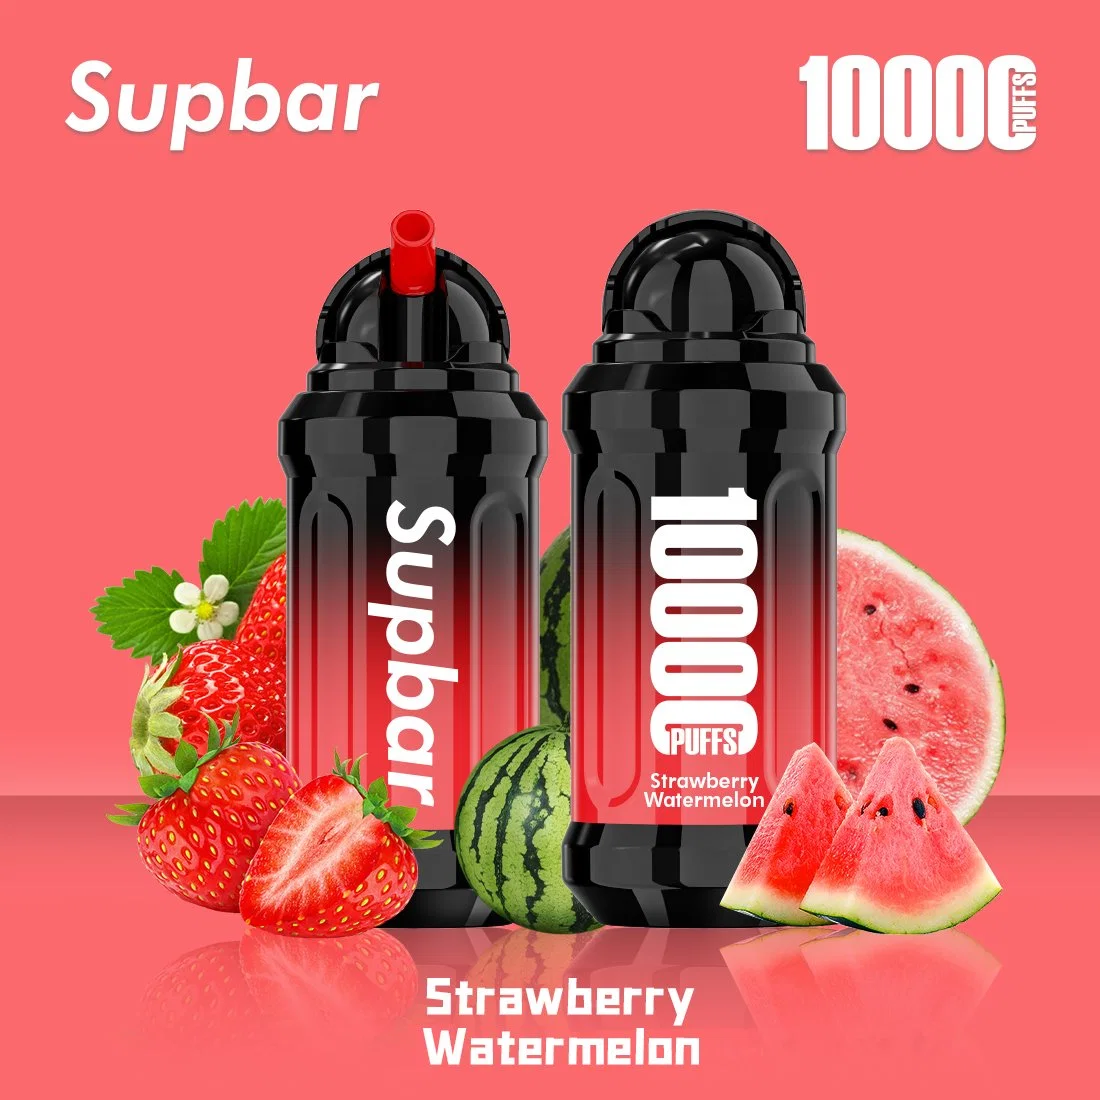 Supbar Mini Pot 10000 Puffs Disposable/Chargeable Pod Box Disposable/Chargeable Vape Pen OEM vape Bar Disposable/Chargeable Vape